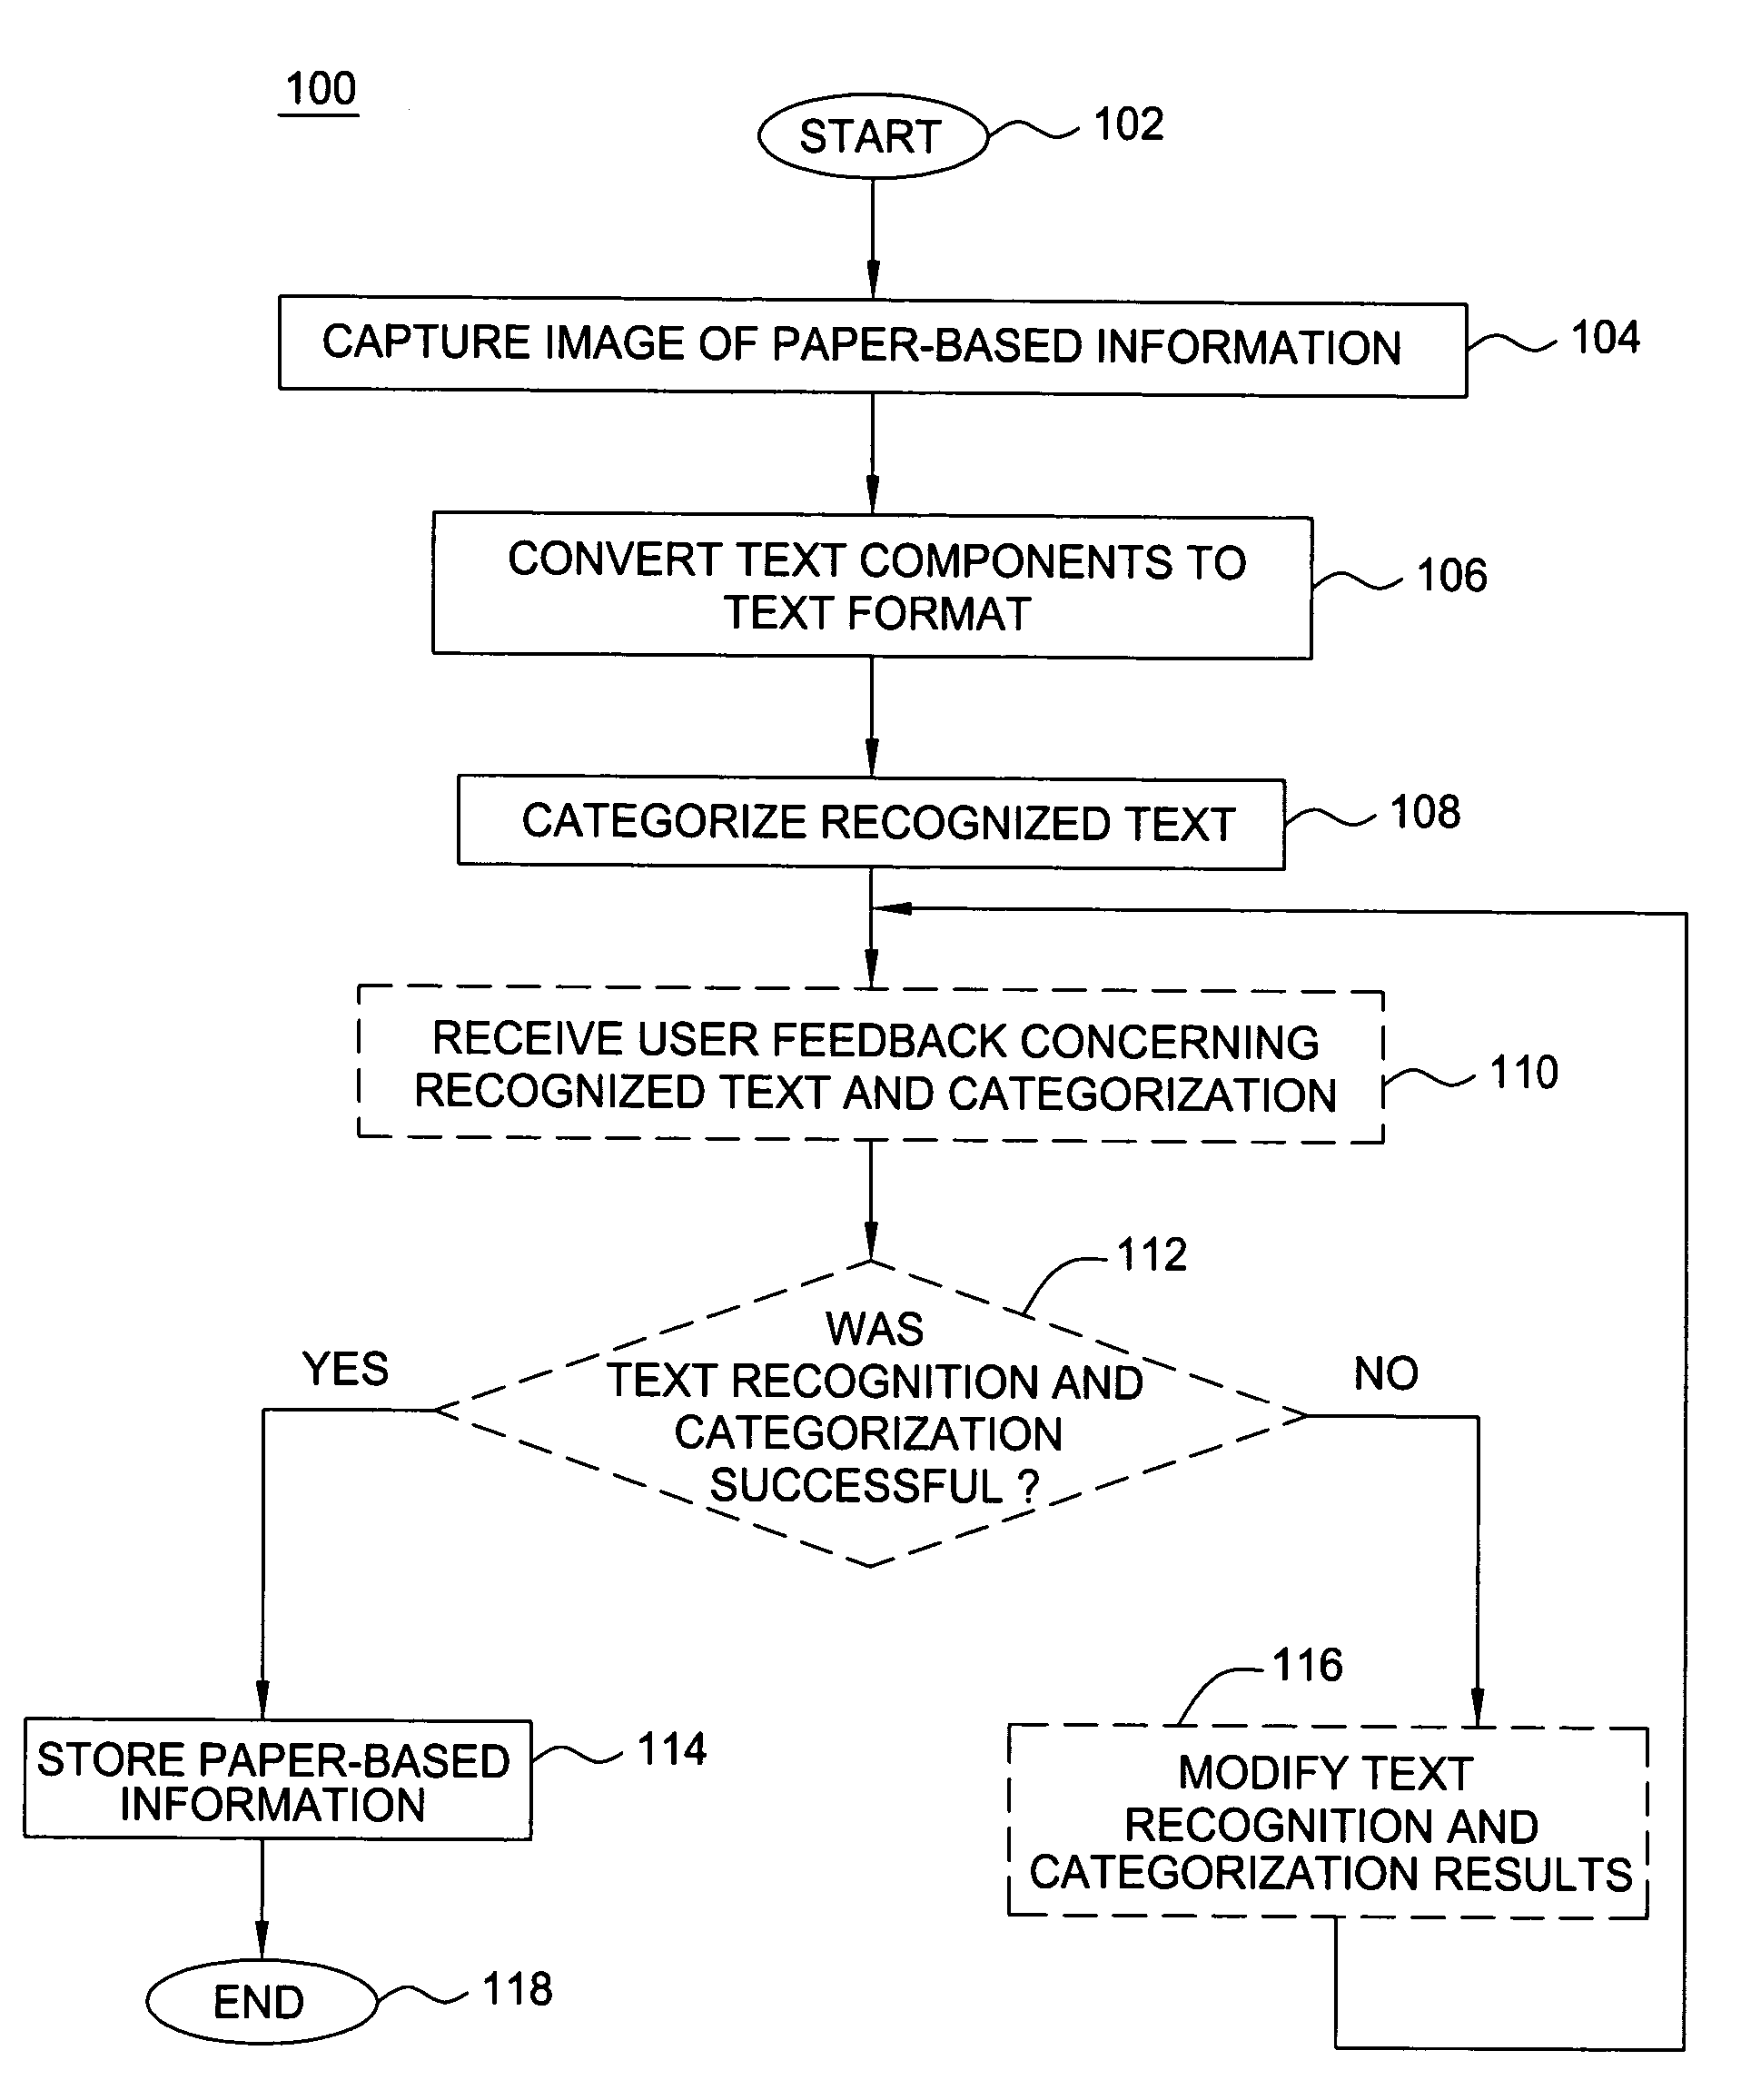 Method and apparatus for capturing paper-based information on a mobile computing device